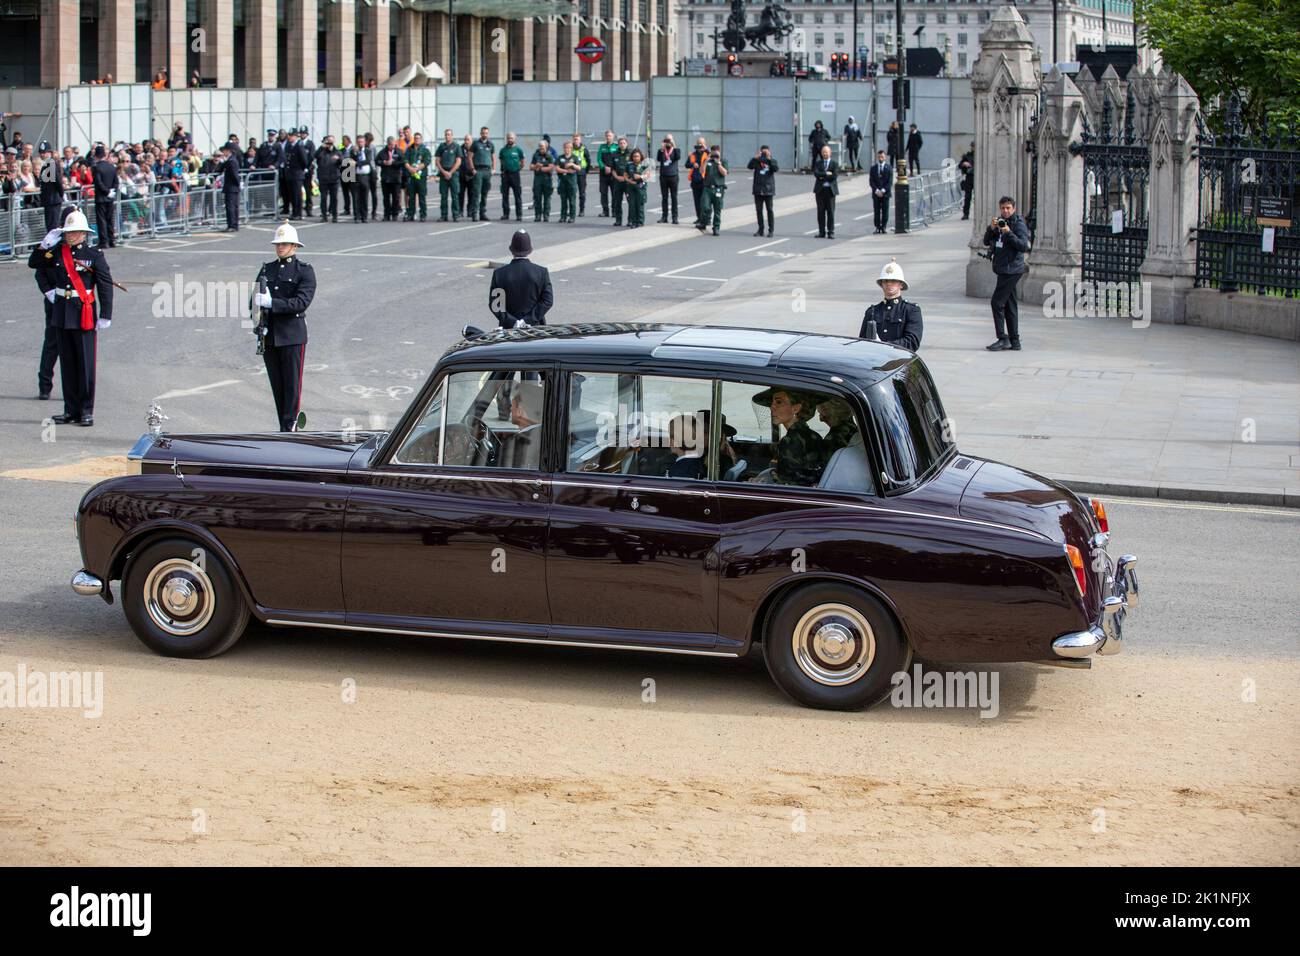 London, England. 19th September, 2022. The Princess of Wales, and her children Prince George and Princess Charlotte leave Westminster Abbey following the service for the State Funeral of her Majesty Queen Elizabeth II. The funeral was one of the biggest events the country has ever seen. Credit: Kiki Streitberger / Alamy Live News Stock Photo